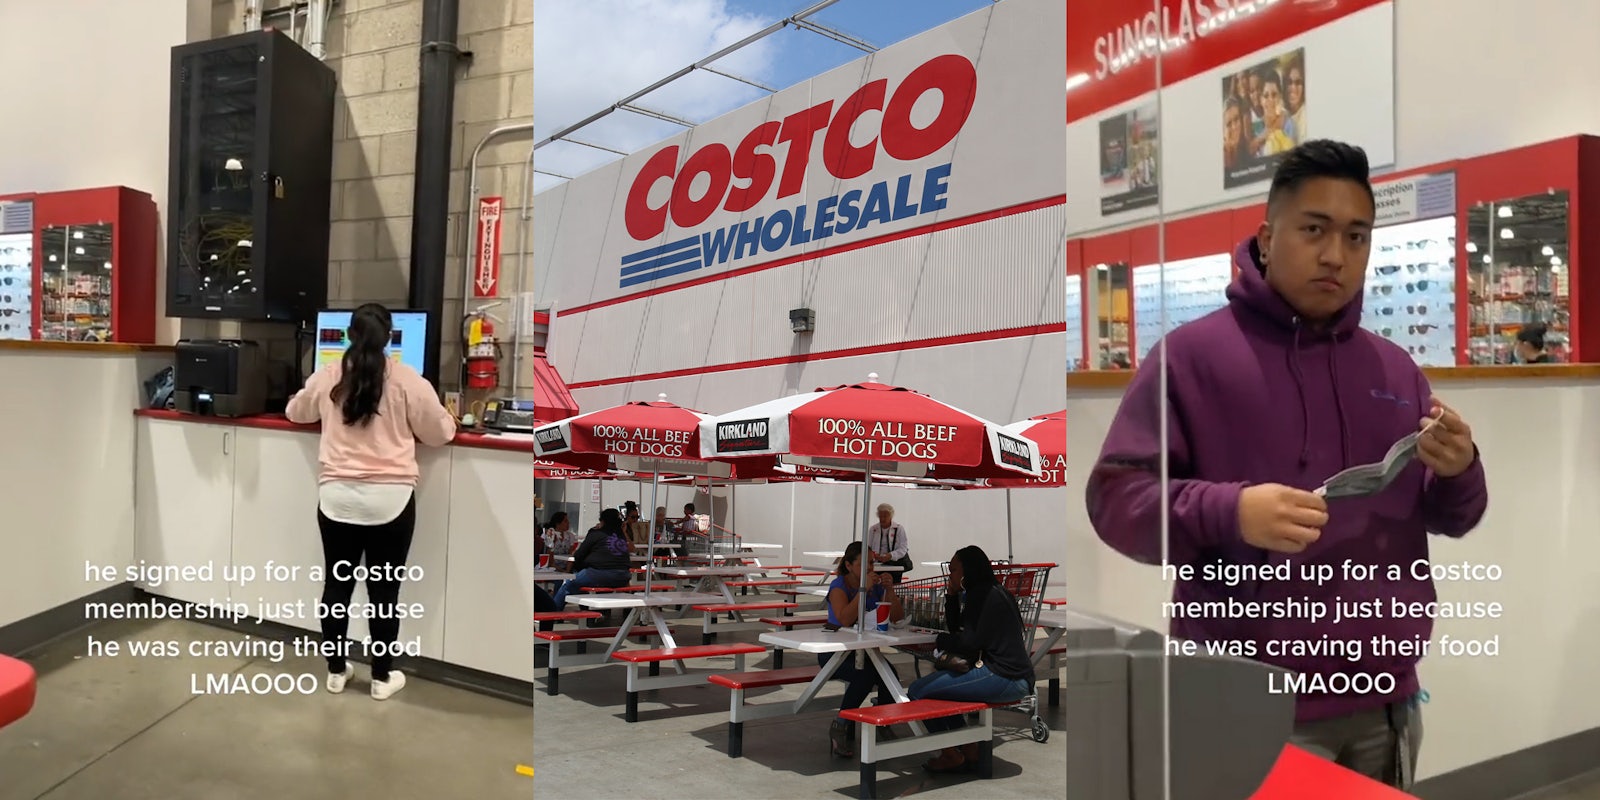 Costco employee with caption 'he signed up for a Costco membership just because he was craving their food LMAOOO' (l) Costco outdoor food court (c) Costco employee with caption 'he signed up for a Costco membership just because he was craving their food LMAOOO' (r)